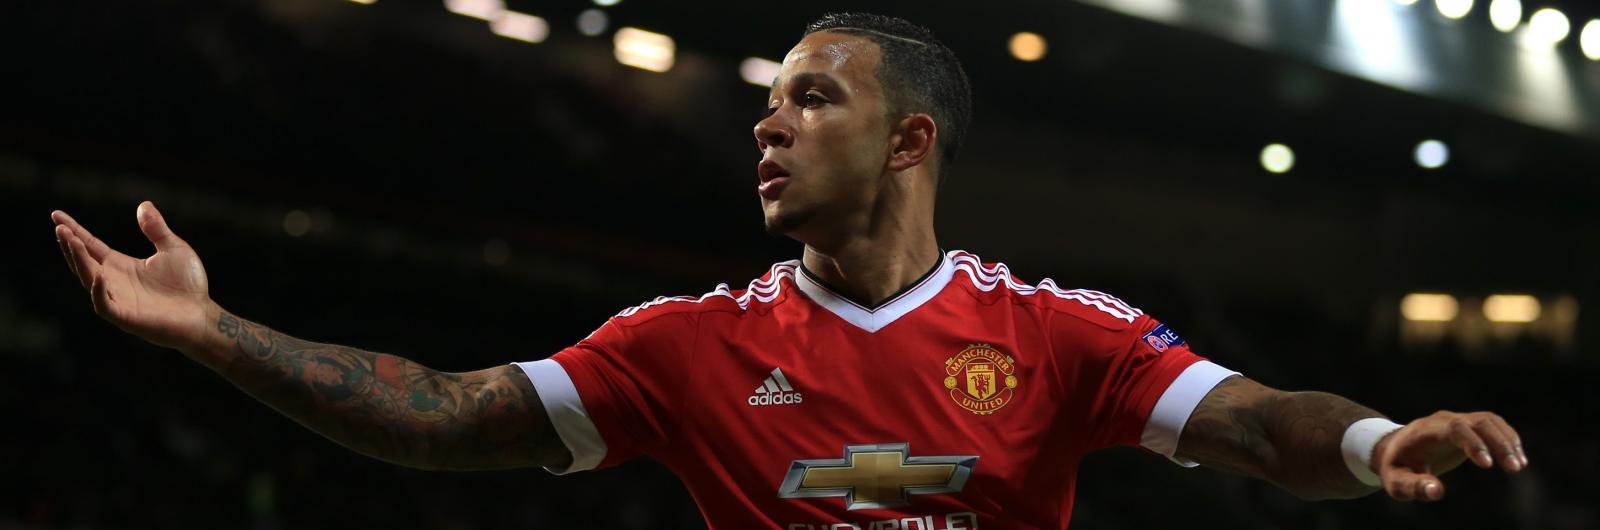 “Only a miracle” can revive Memphis Depay’s Manchester United career